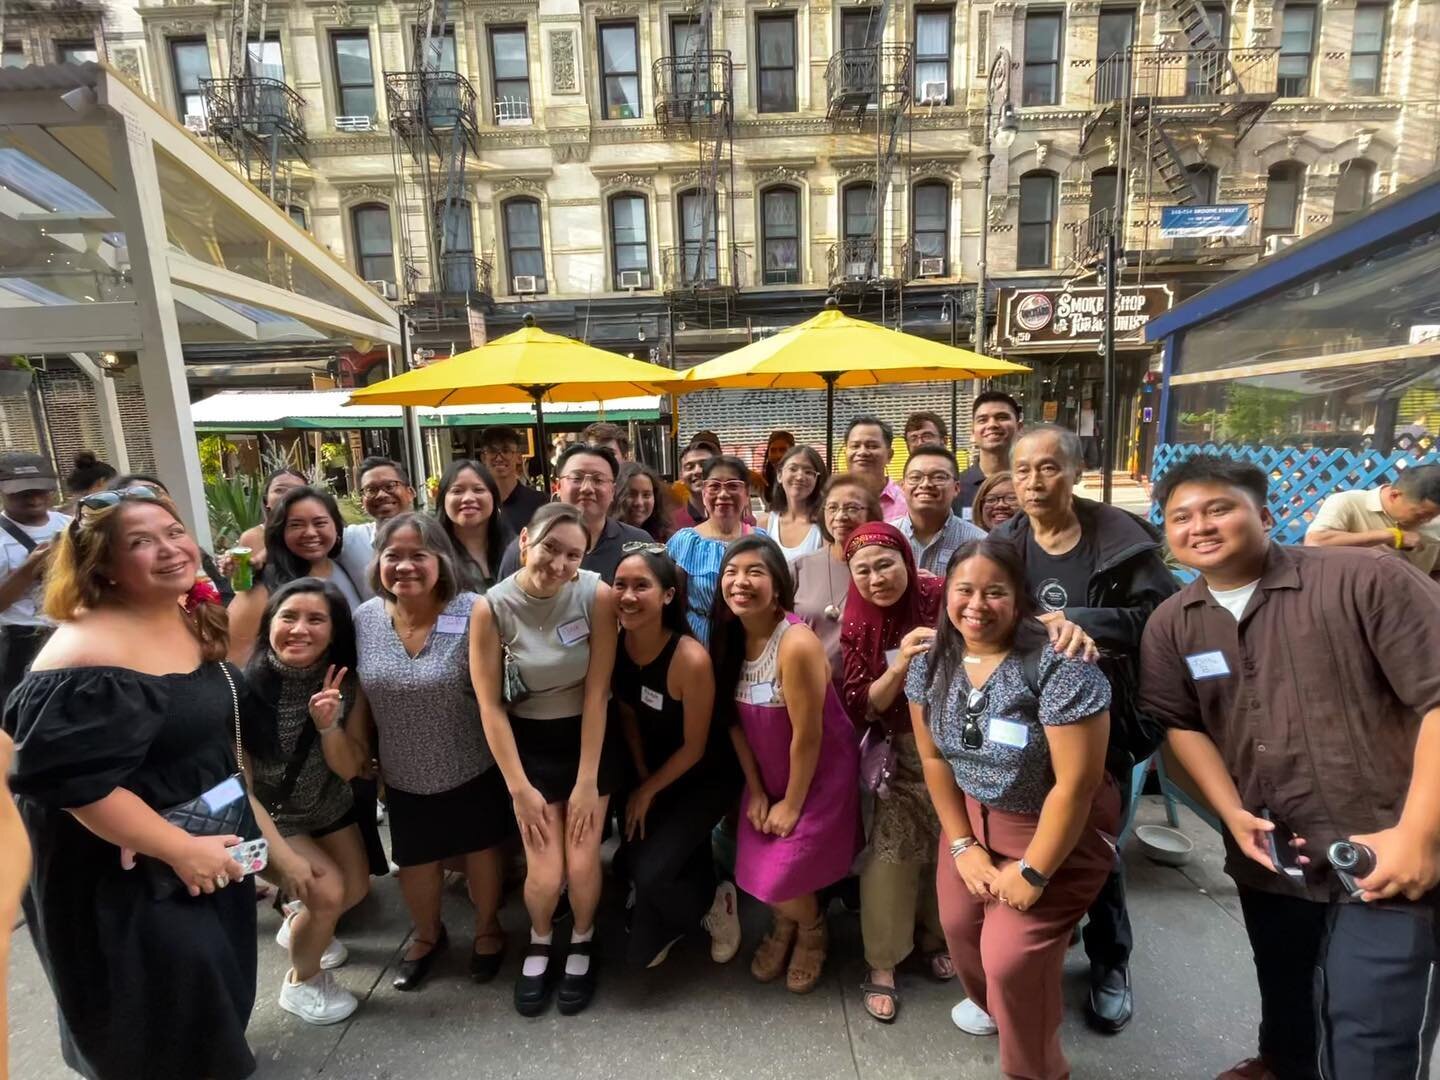 And just like that...✨we're back✨

A big shout out to the 40+ people who joined us for our first event since our club's hiatus. It was great reconnecting with old friends and making new ones! 

Maraming salamat to the @kalye.nyc crew for making this 